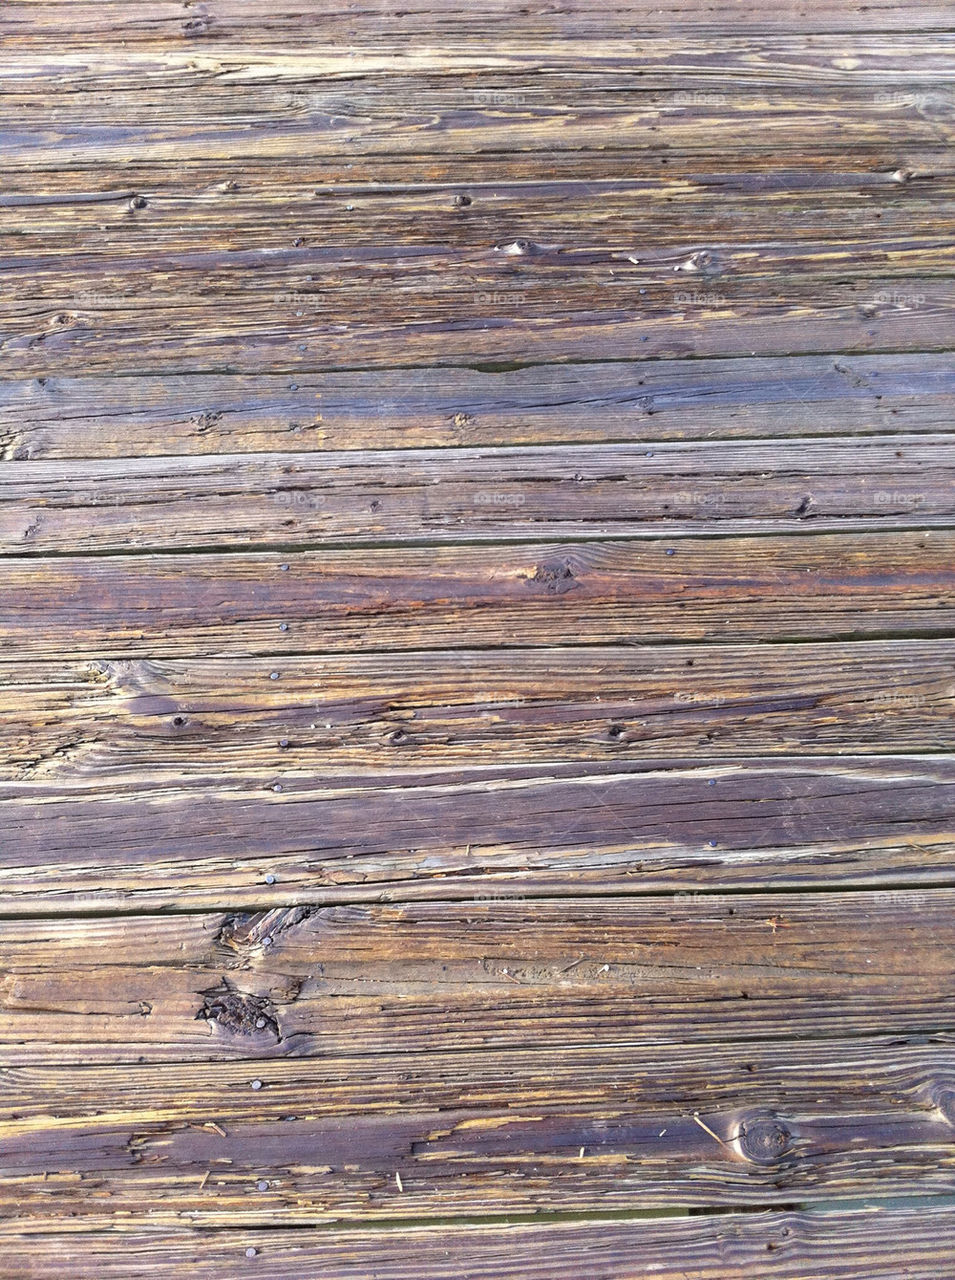 wood weathered floor deck by tplips01